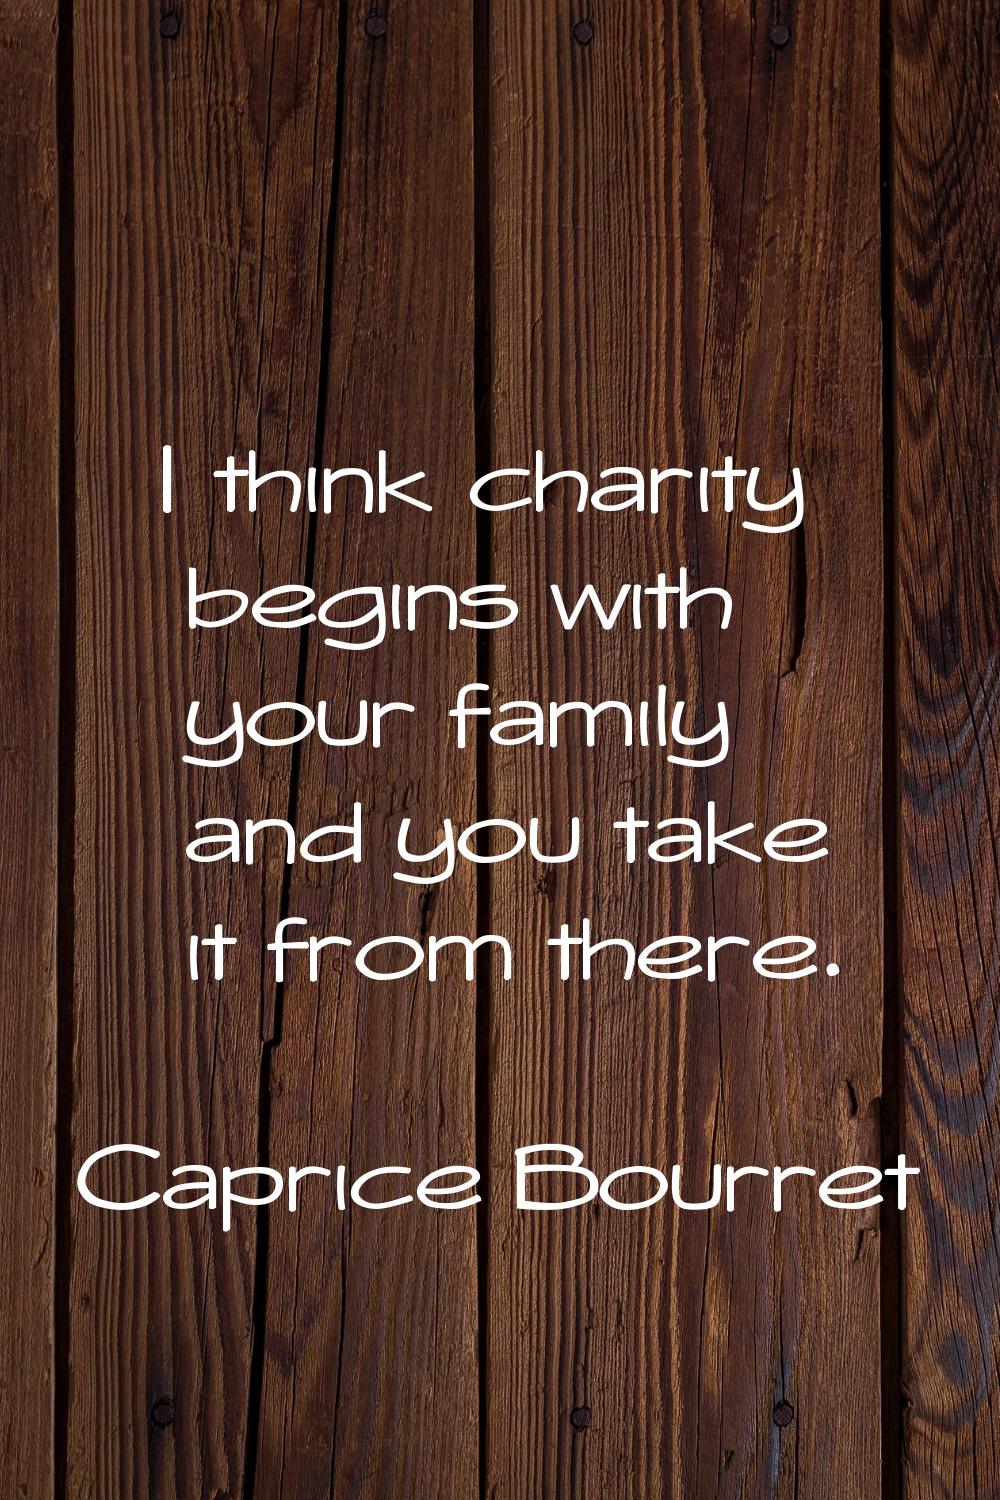 I think charity begins with your family and you take it from there.